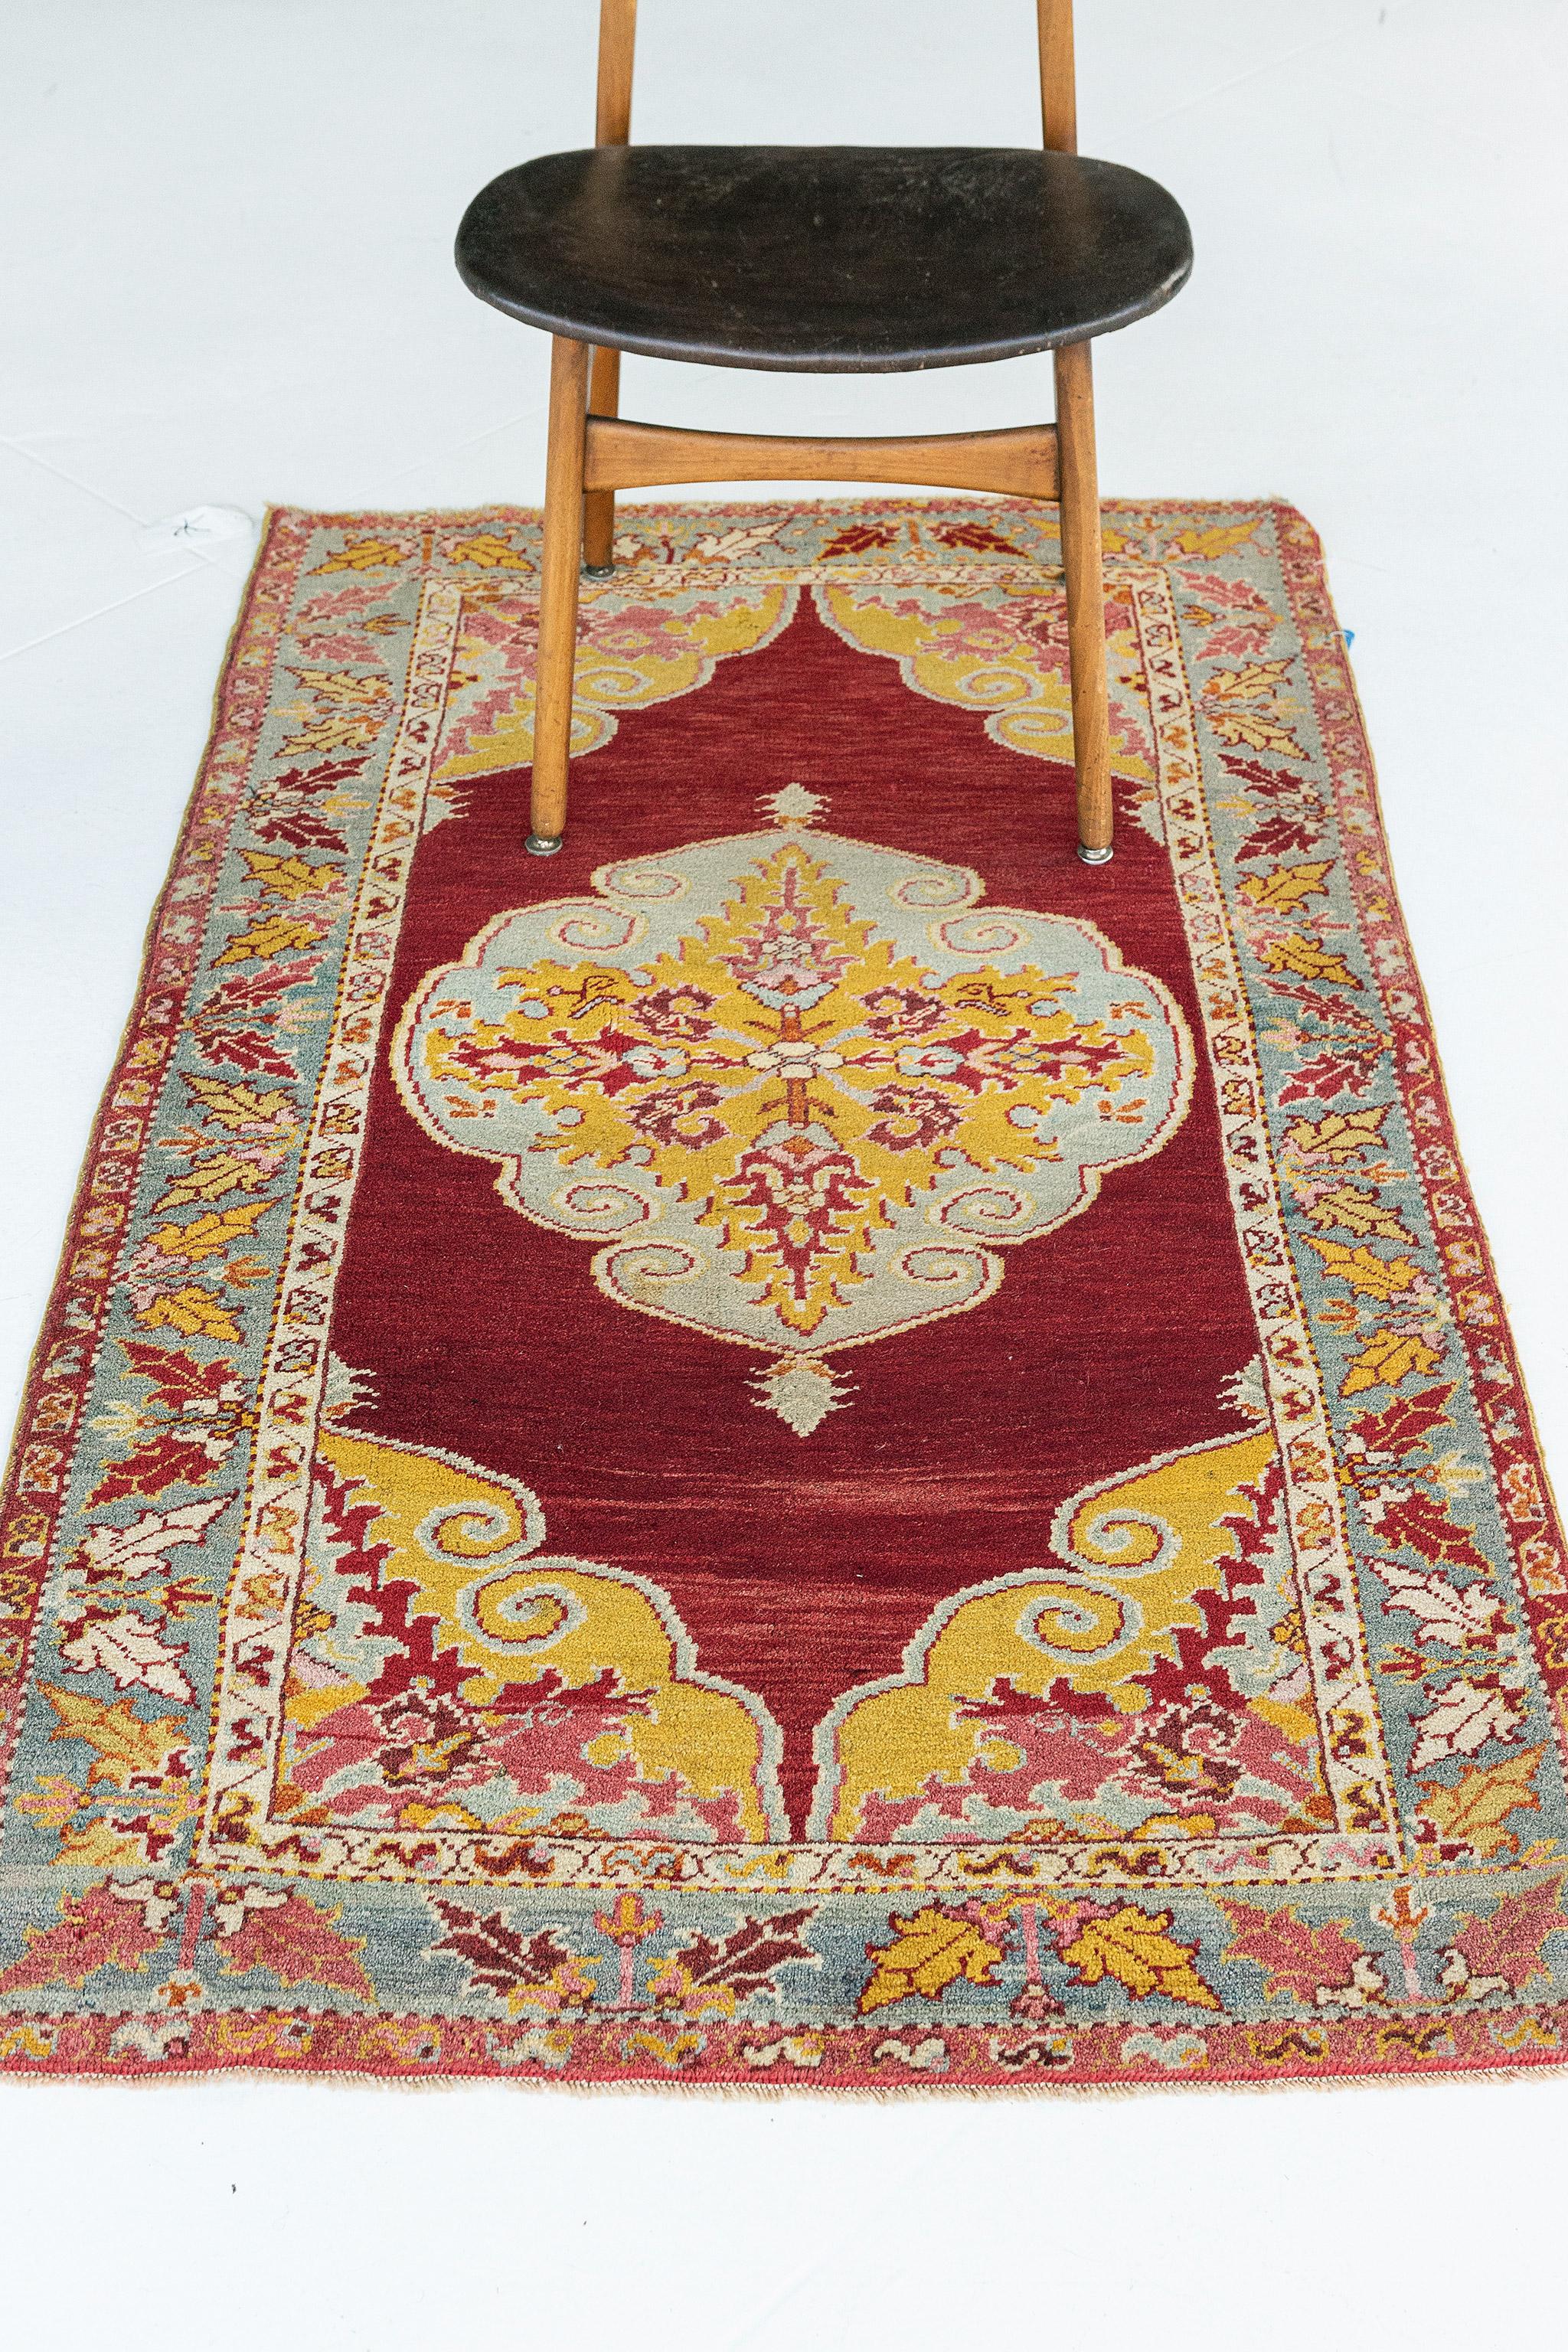 Impressive in style, this Vintage Turkish Anatolian rug features an overall luxurious composition depicting age-old Anatolian motifs. Taking center stage is a lozenge central medallion patterned inside with iris and stylized florals. A rectilinear